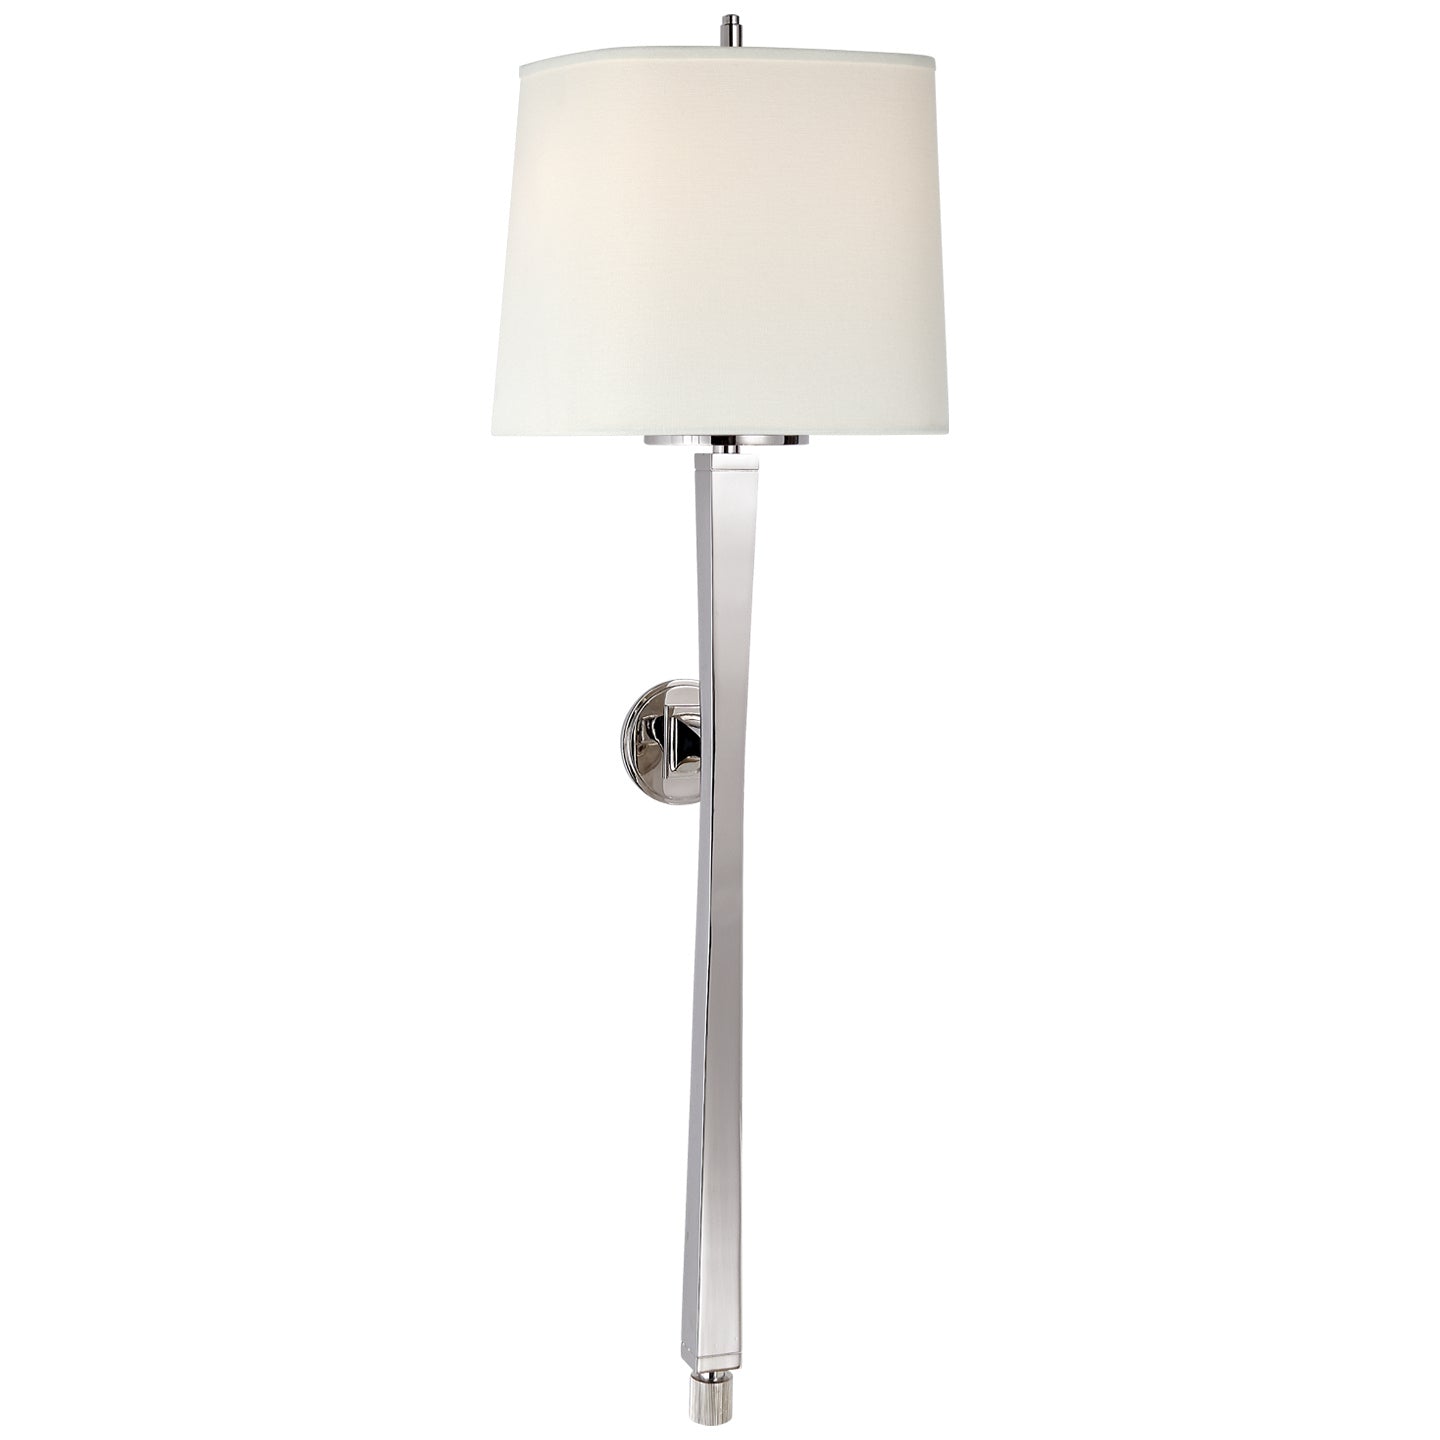 Visual Comfort Signature - TOB 2741PN-L - Two Light Wall Sconce - Edie - Polished Nickel